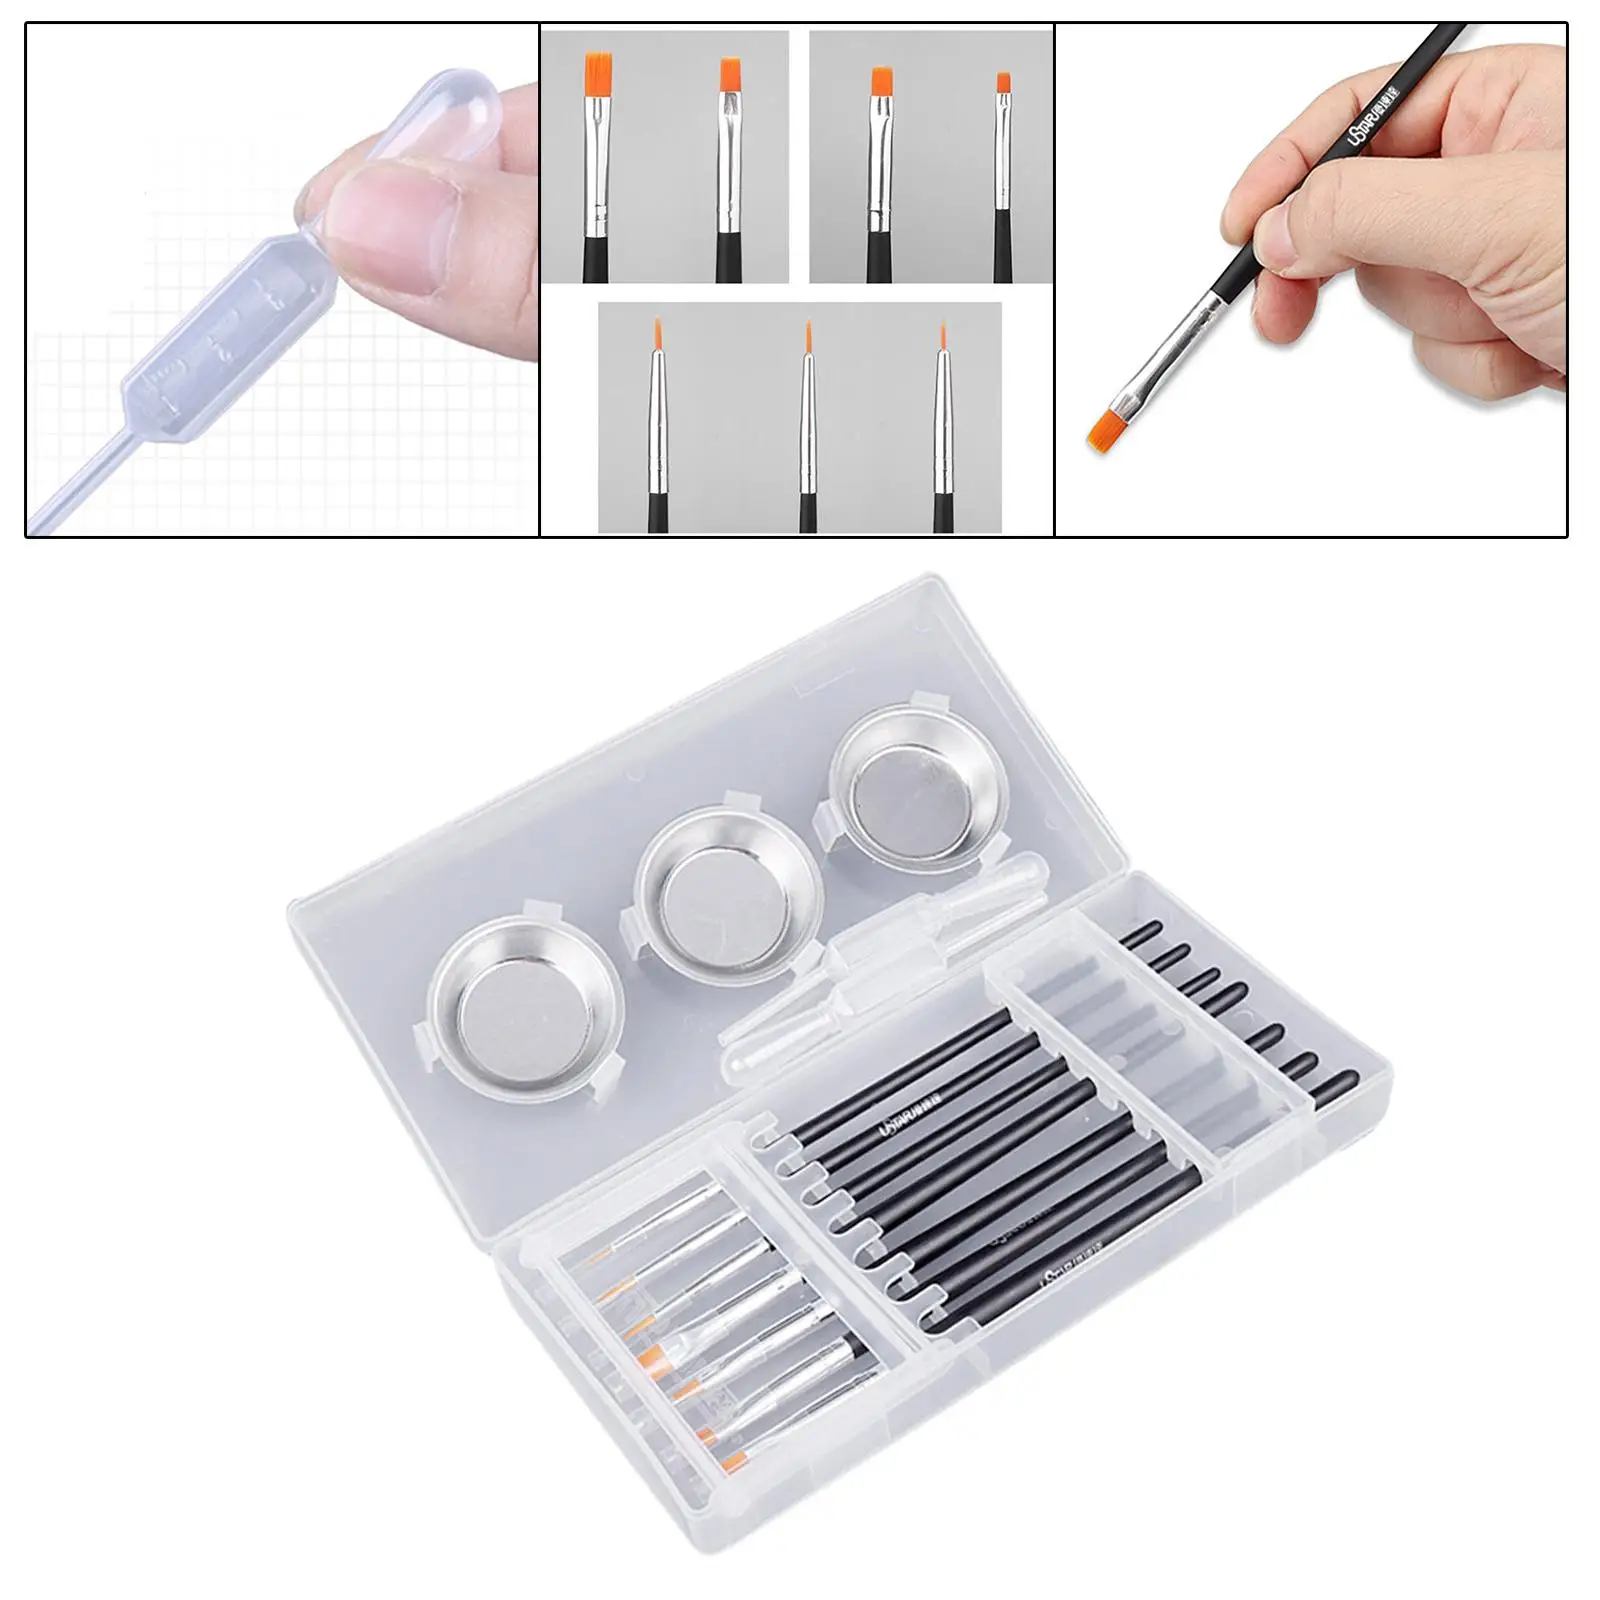 Painting Brush Palette Set Model Coating Tool for Kids or Adults DIY Art Craft Painting Model Building Tools Model Painting